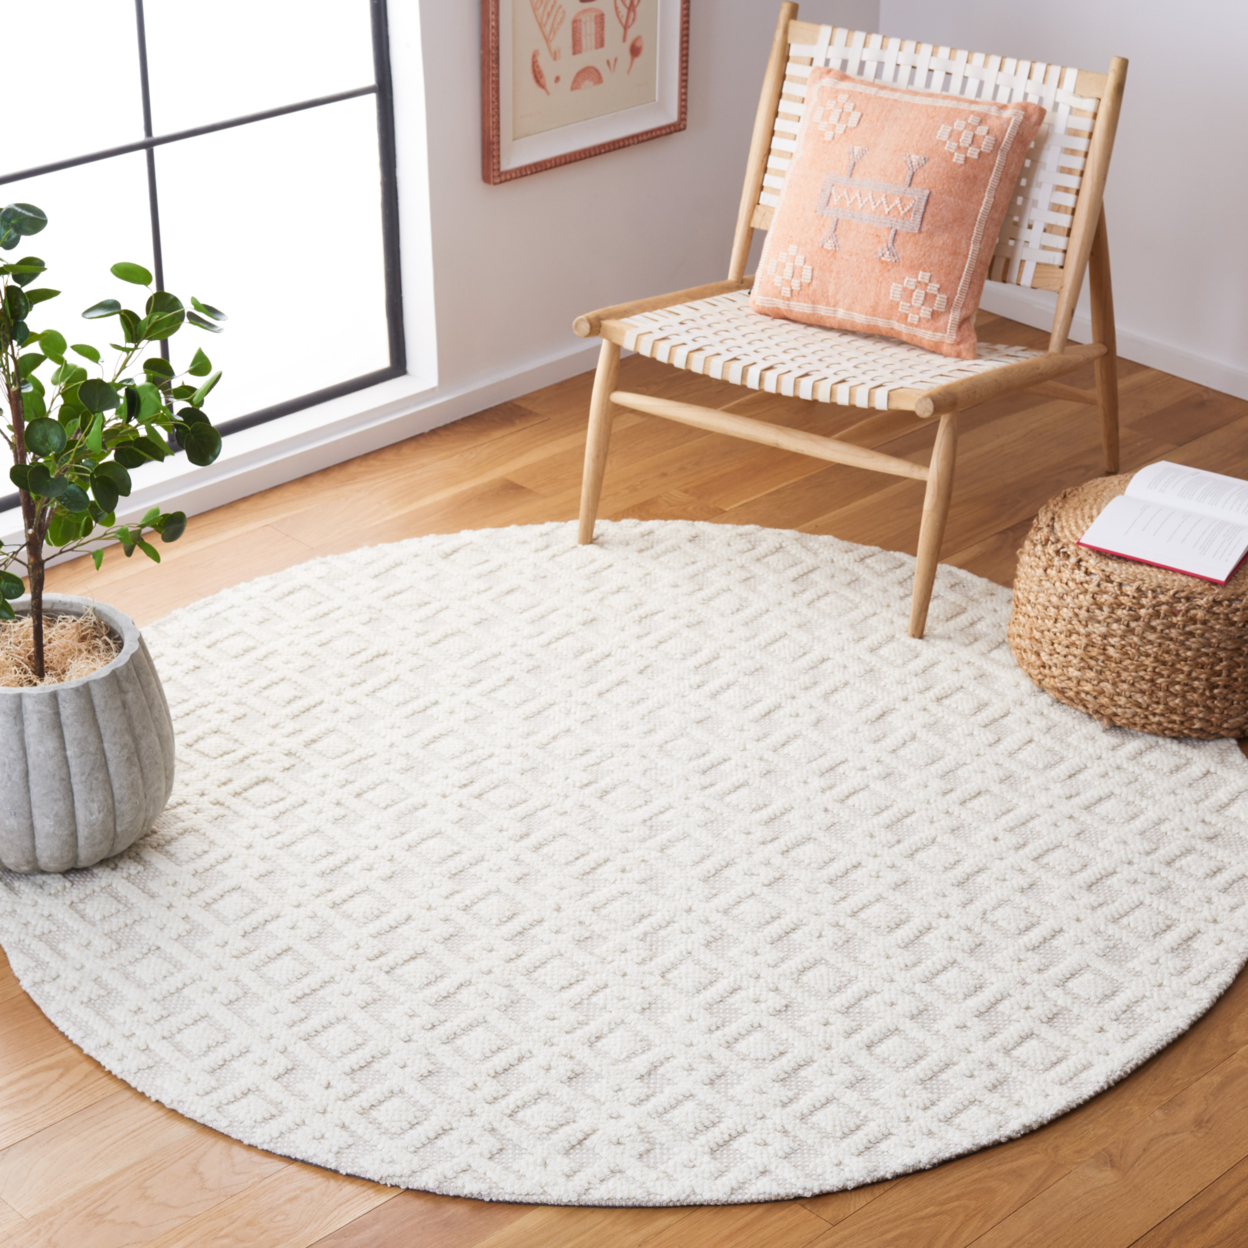 SAFAVIEH Vermont Collection VRM102A Handwoven Ivory Rug - 6 X 9